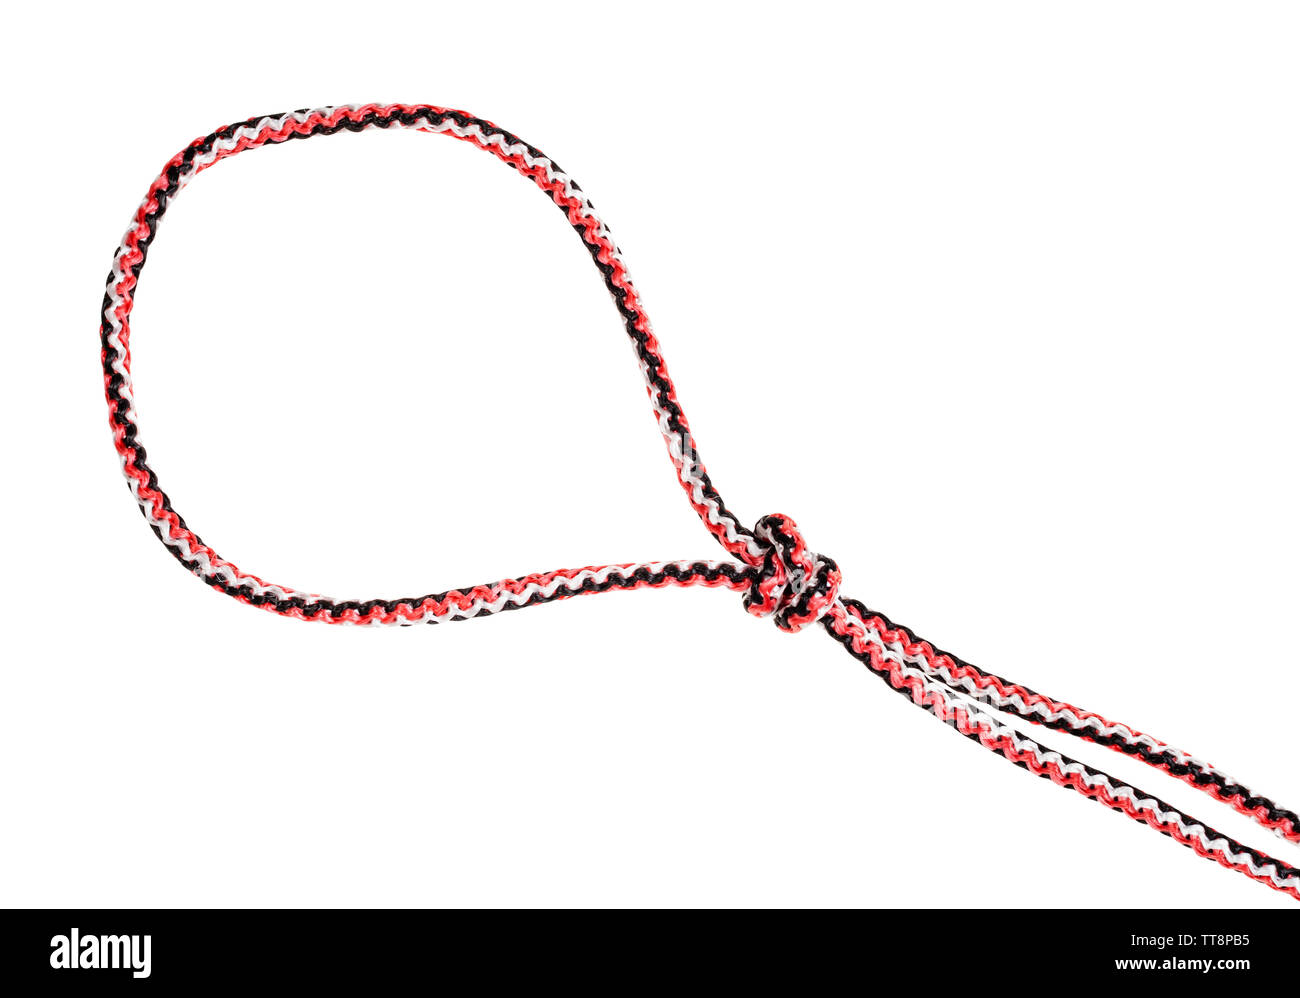 How to tie a Strangle Knot illustrated and animated